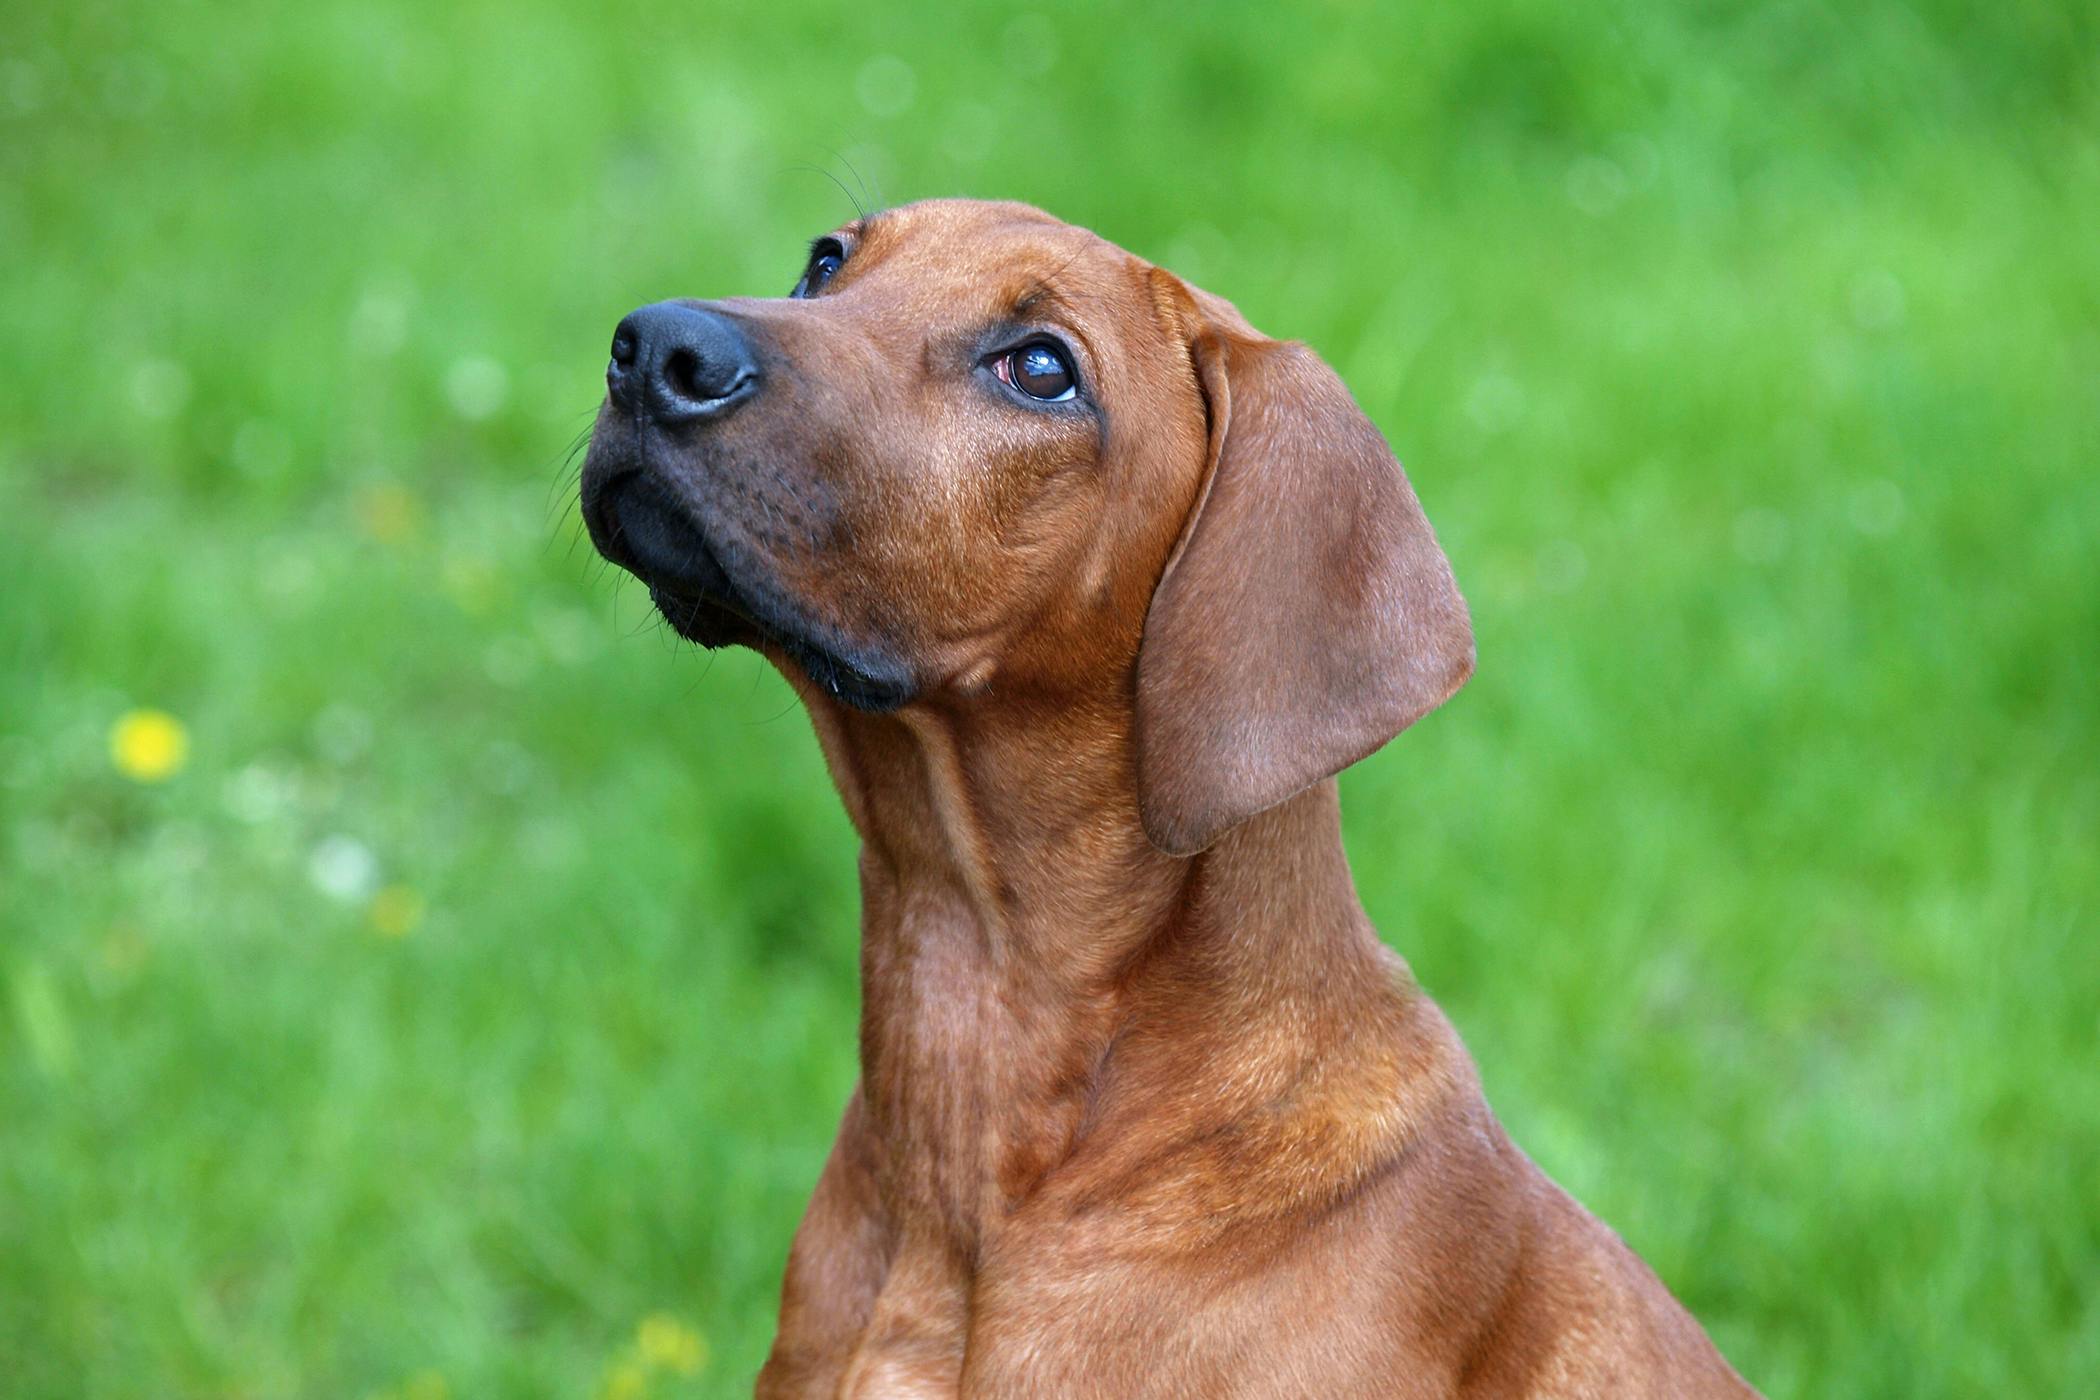 does hypothyroidism cause seizures in dogs